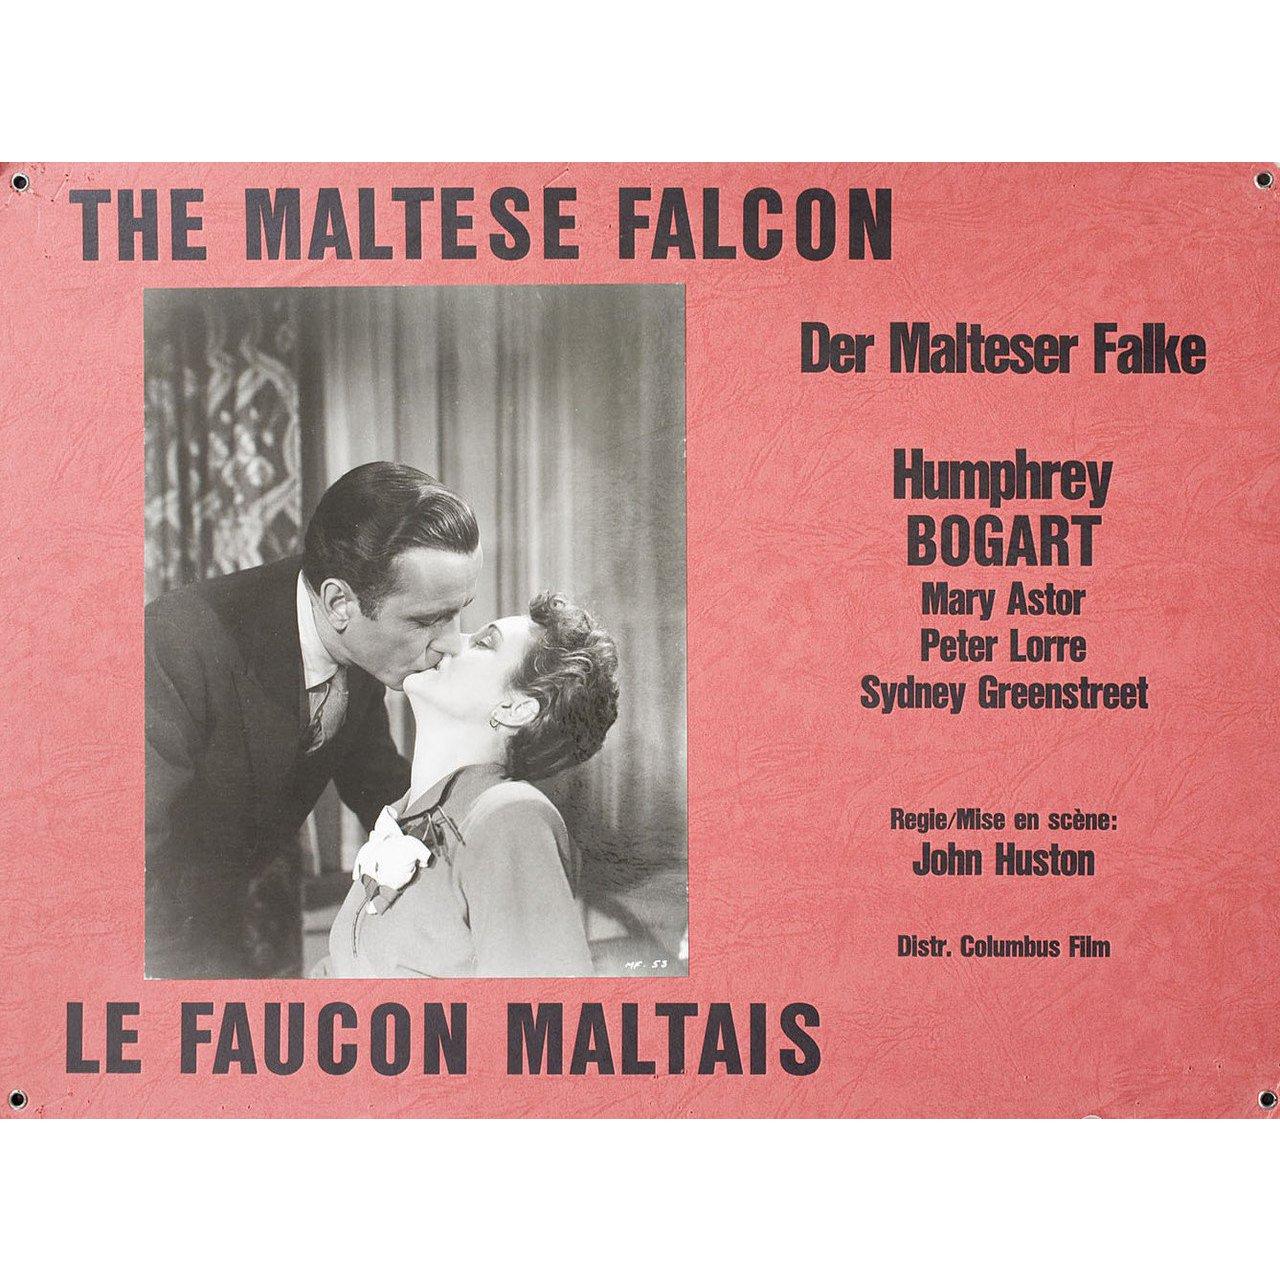 The Maltese Falcon 1970s Swiss Scene Card In Good Condition For Sale In New York, NY